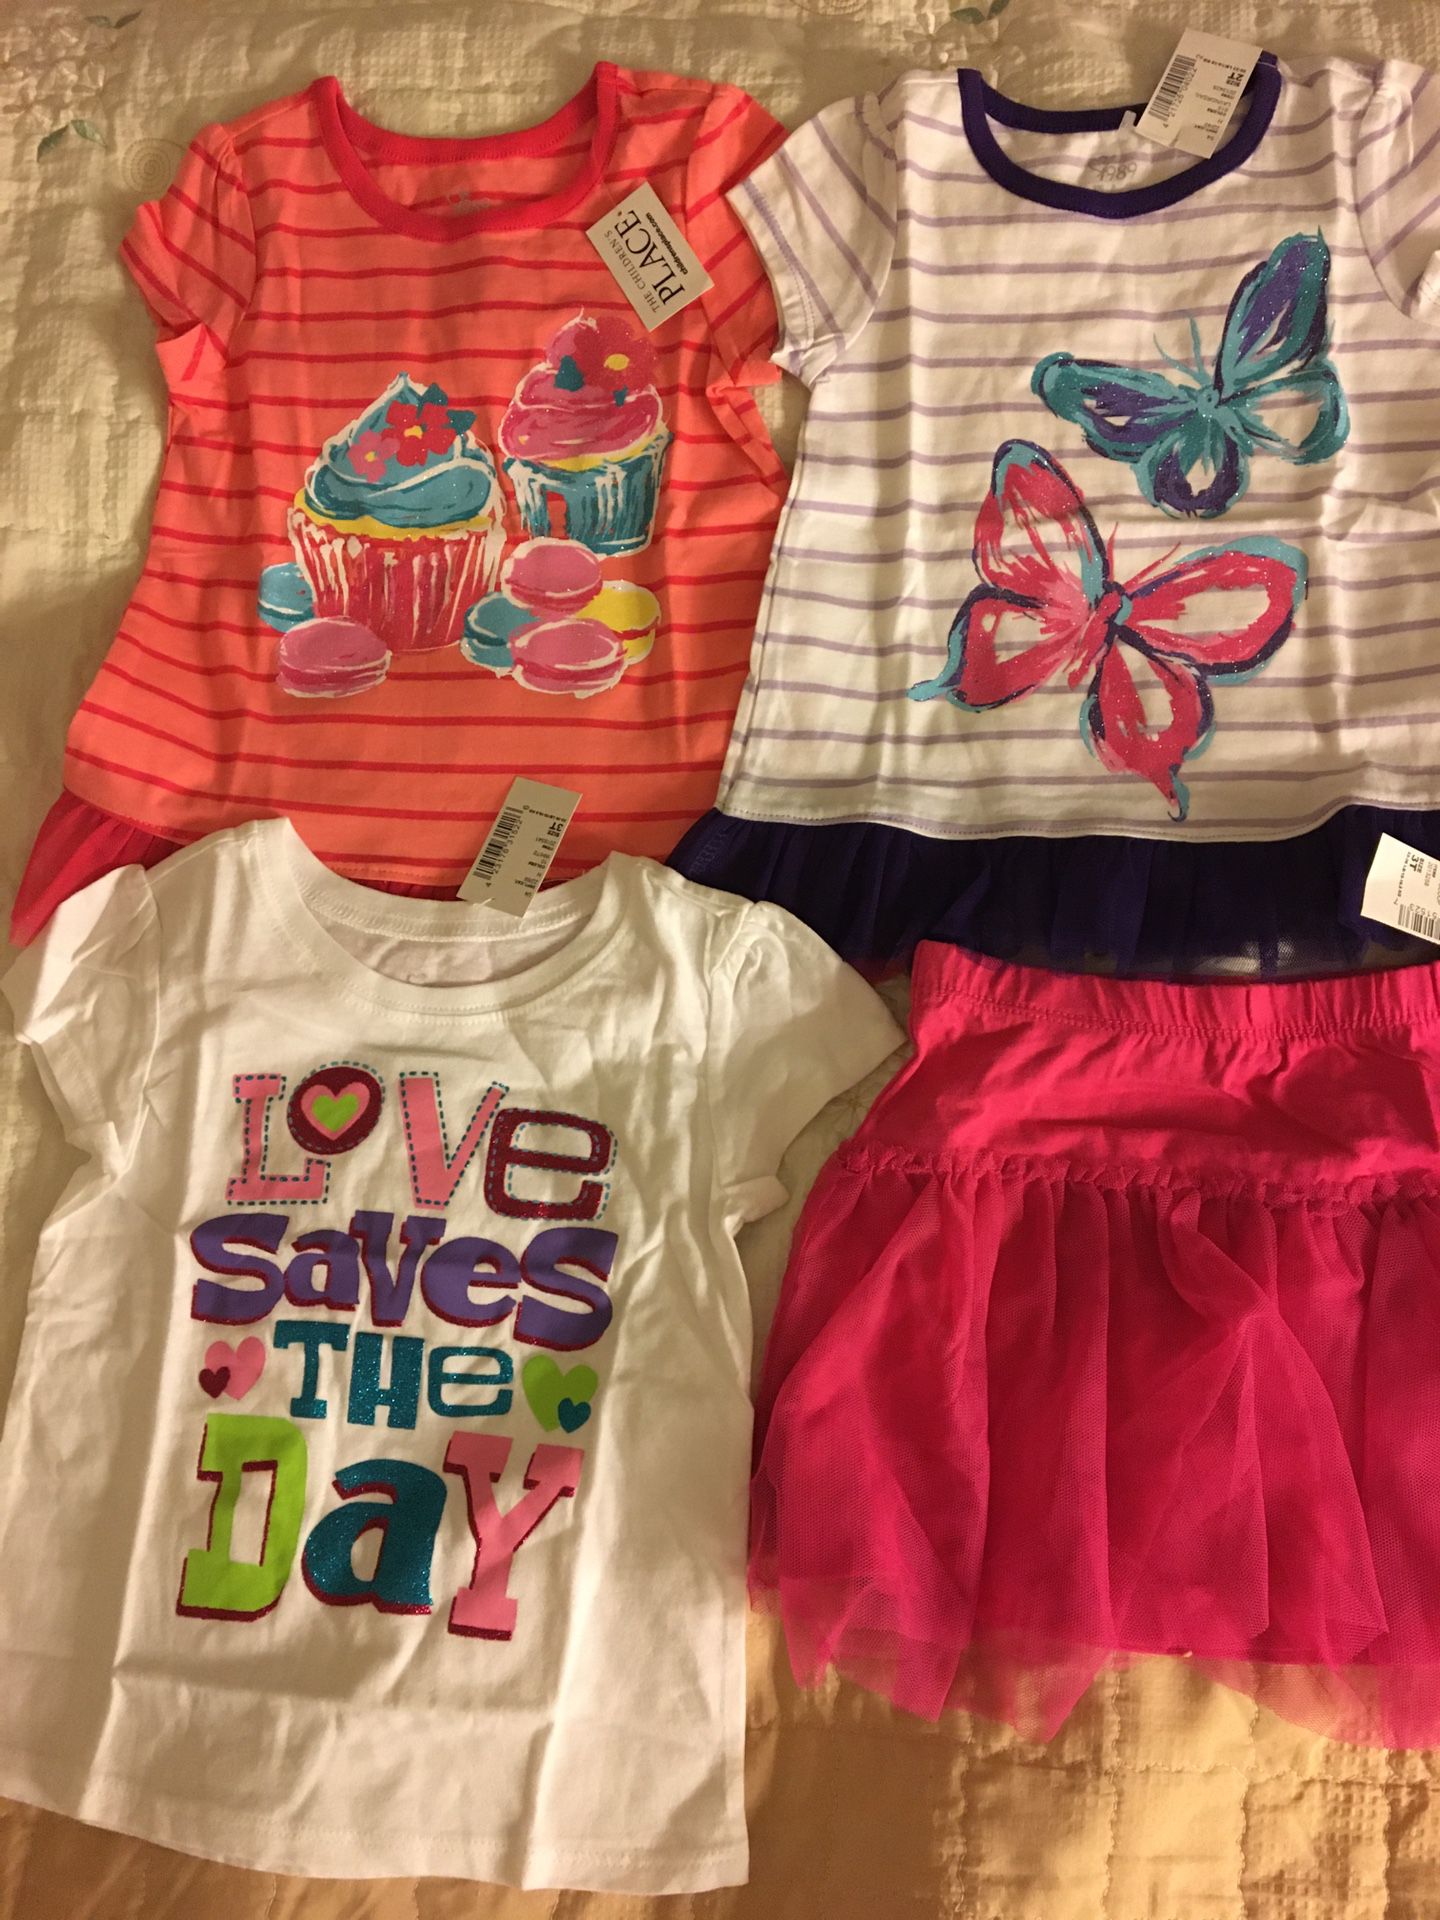 Girls clothes, 3T, $10